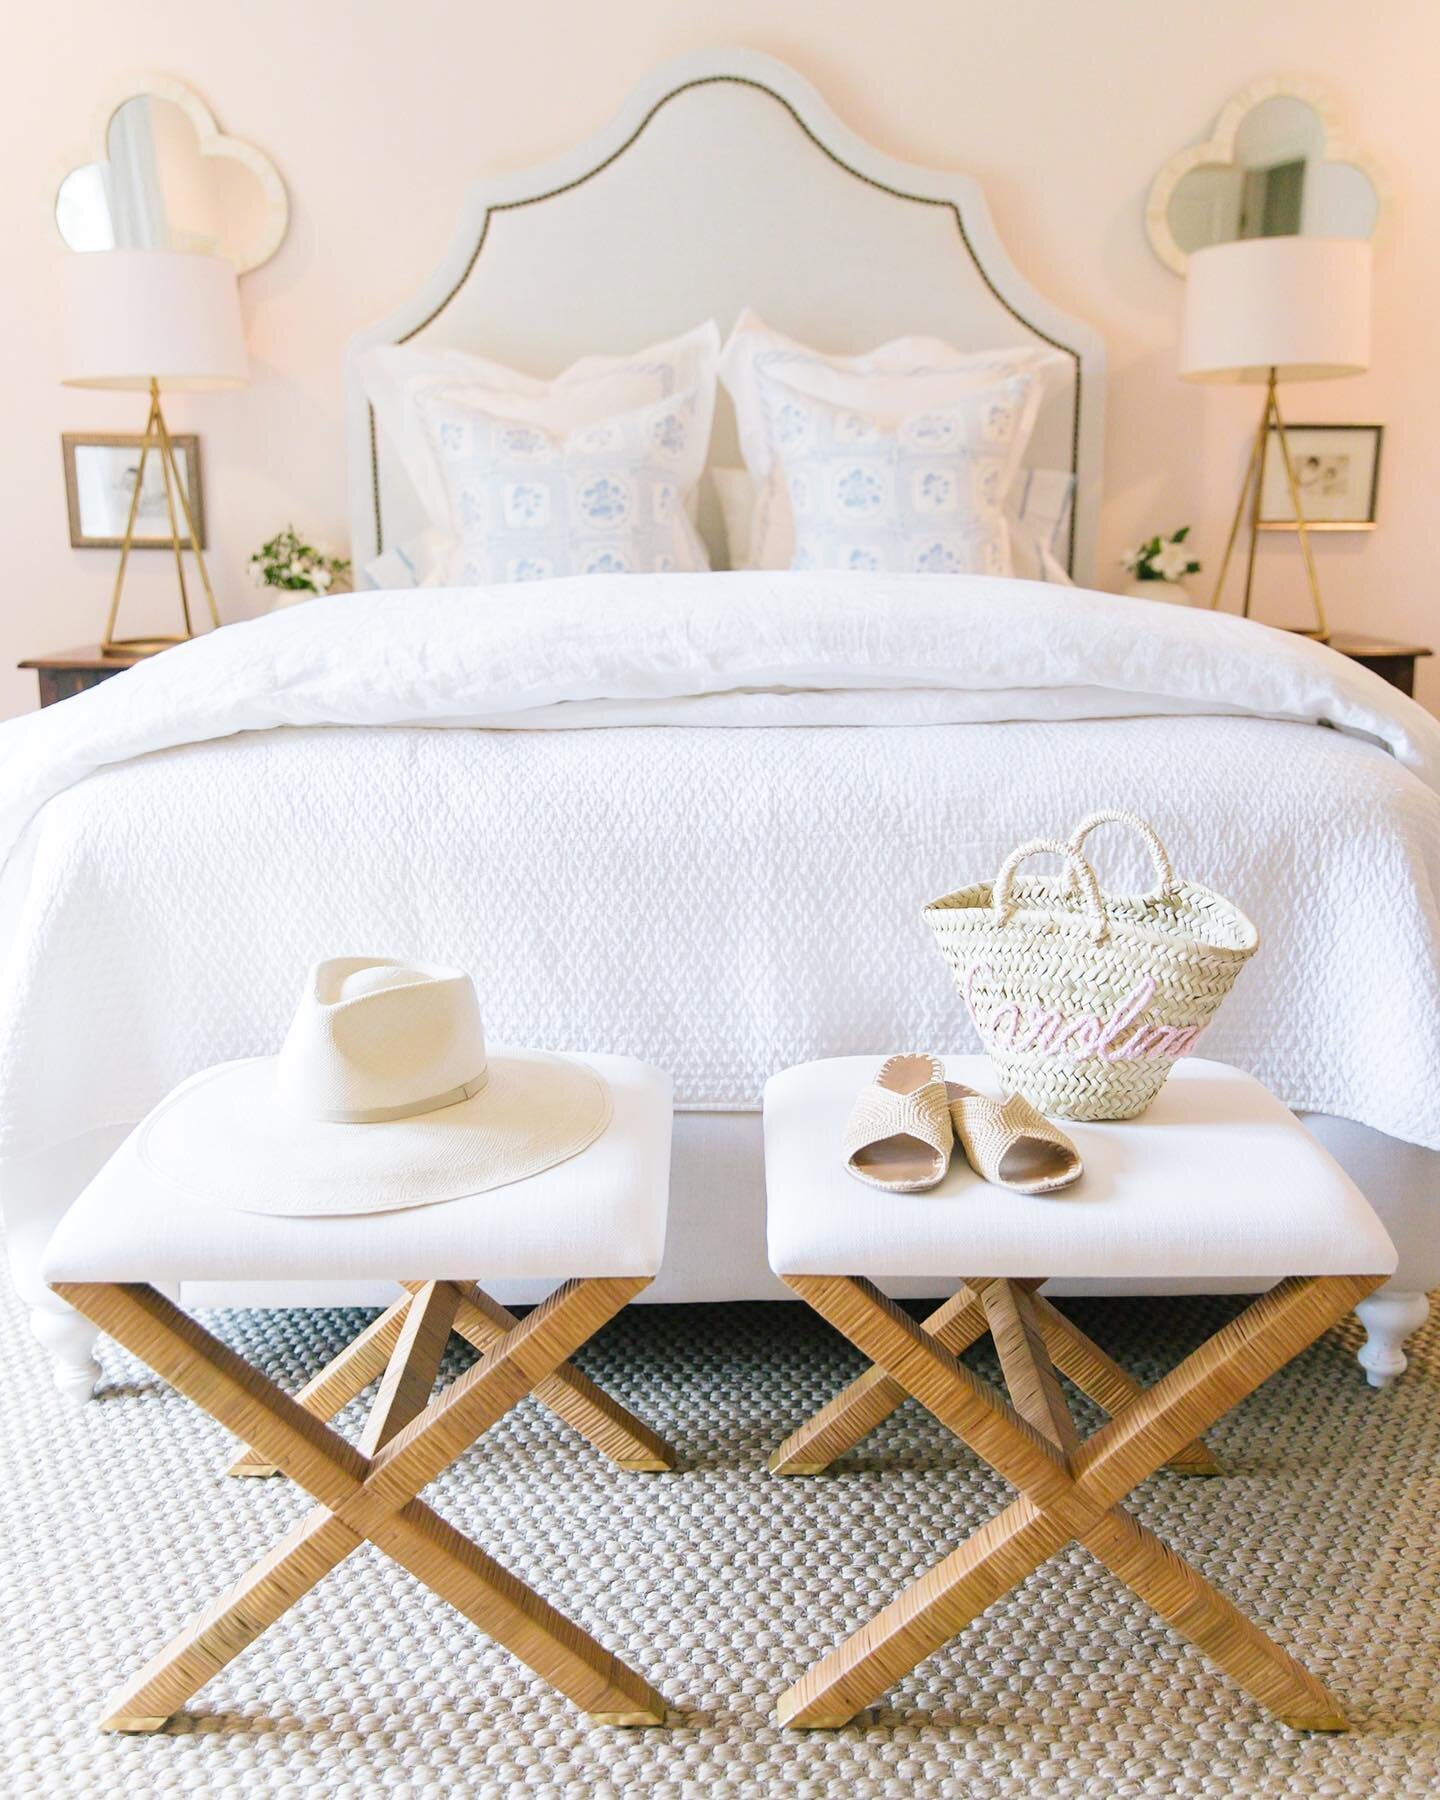 Bringing that sunny island feel into my Birmingham bedroom with a few pieces from @serenaandlily ☀️ Living in Palm Beach for two years now, I have a whole new appreciation for all things rattan and woven! I&rsquo;ve always loved incorporating woven a